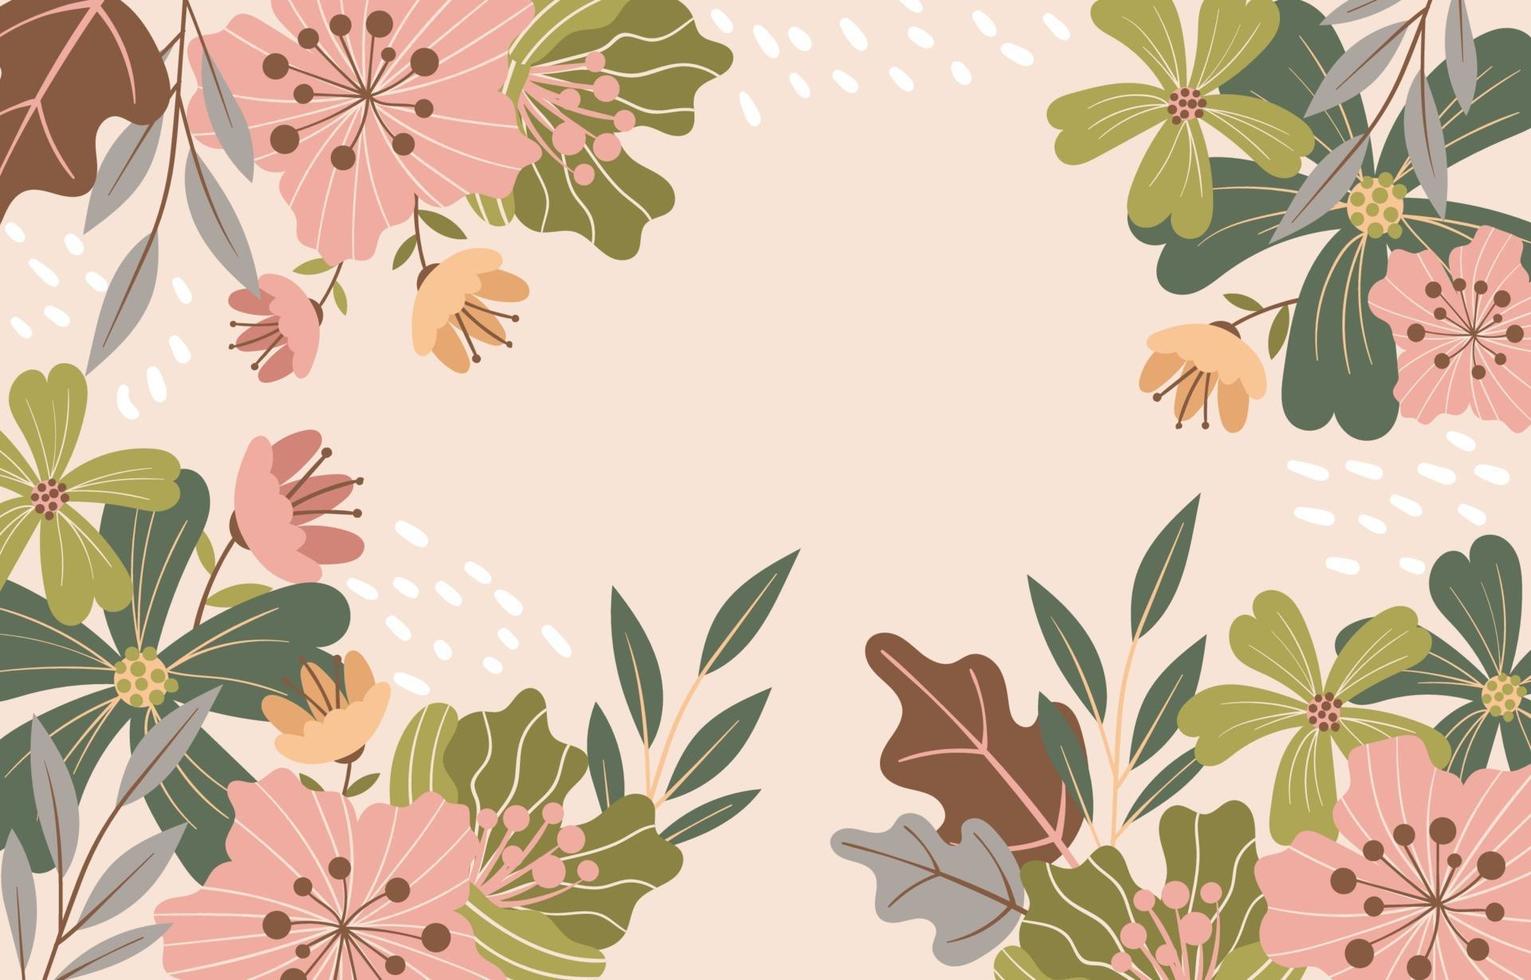 Beautiful Blooming Flowers Floral Background vector